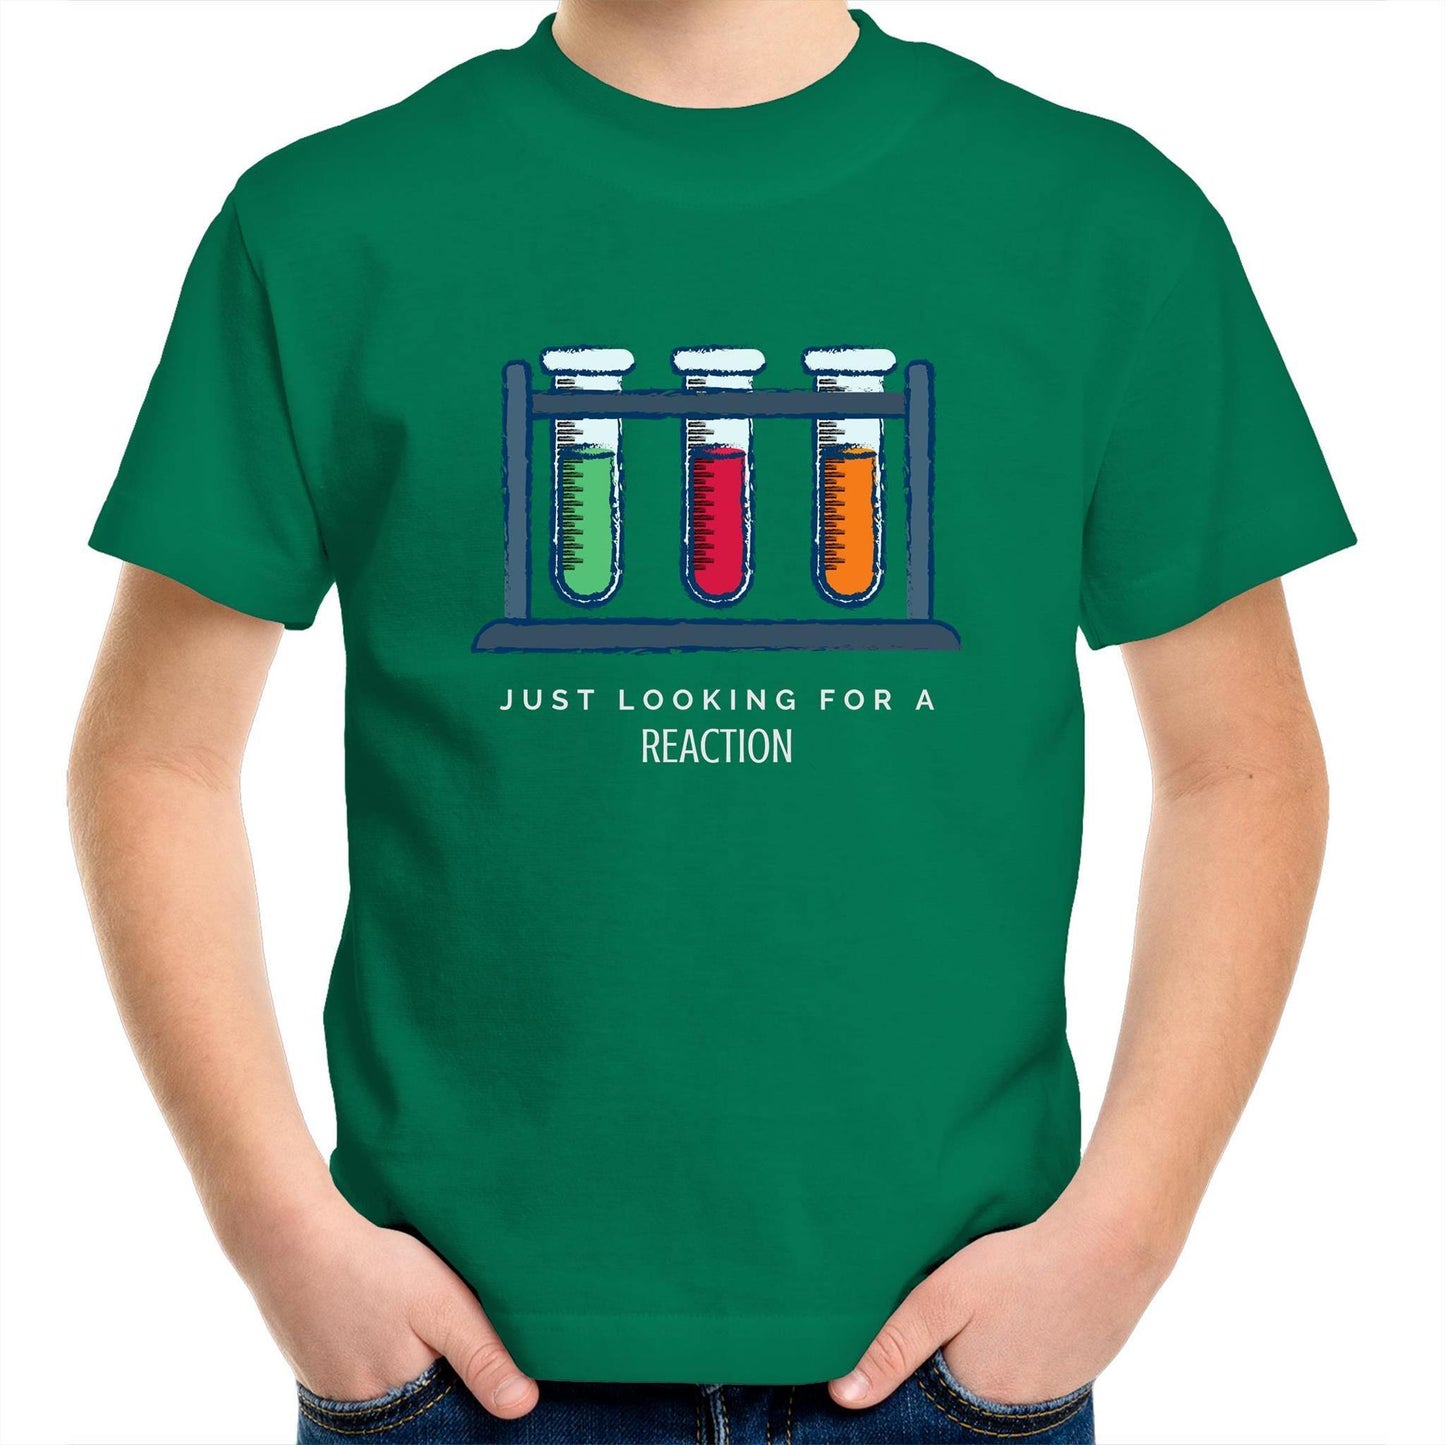 Test Tube, Just Looking For A Reaction - Kids Youth Crew T-Shirt Kelly Green Kids Youth T-shirt Science